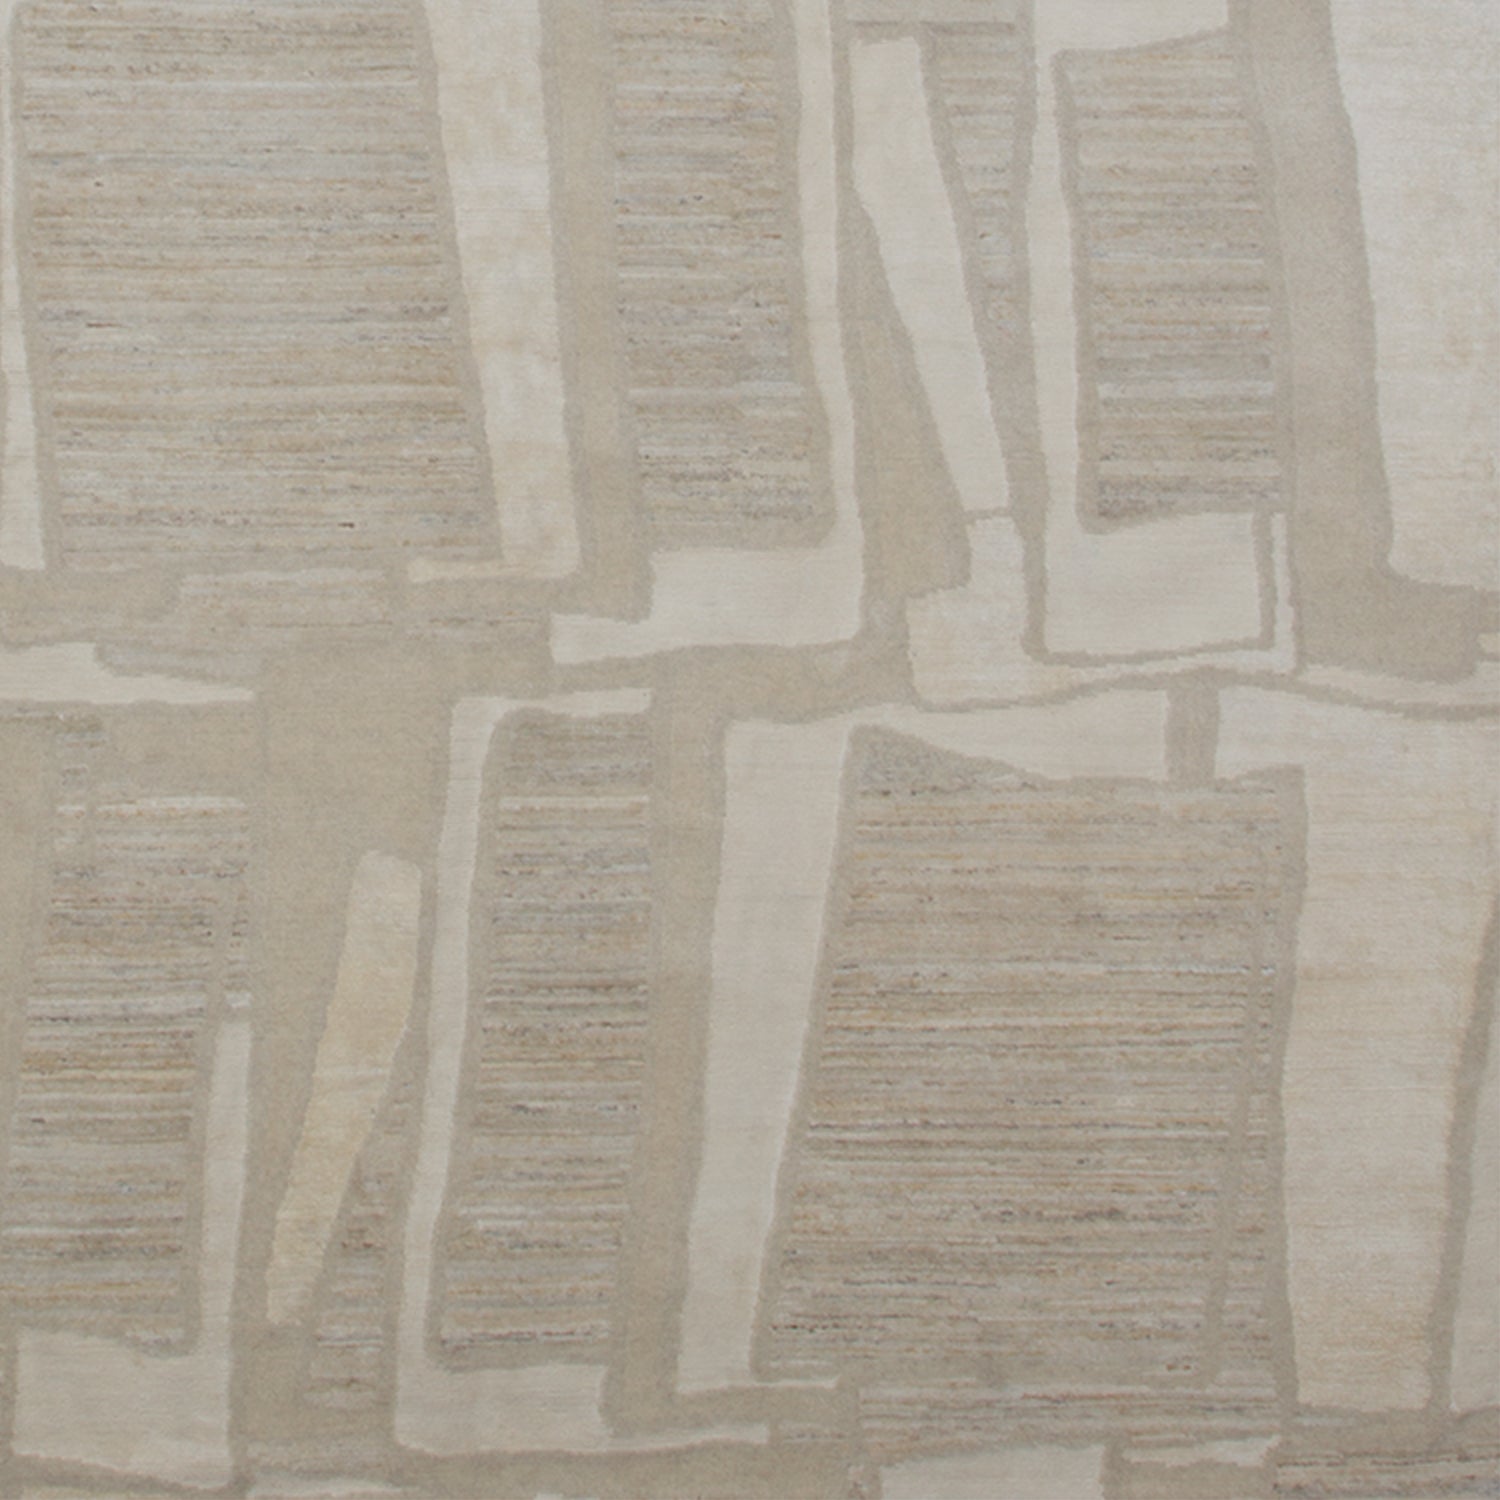 Woven rug swatch in an overlapping hand-drawn rectangle pattern in shades of cream and light gray.